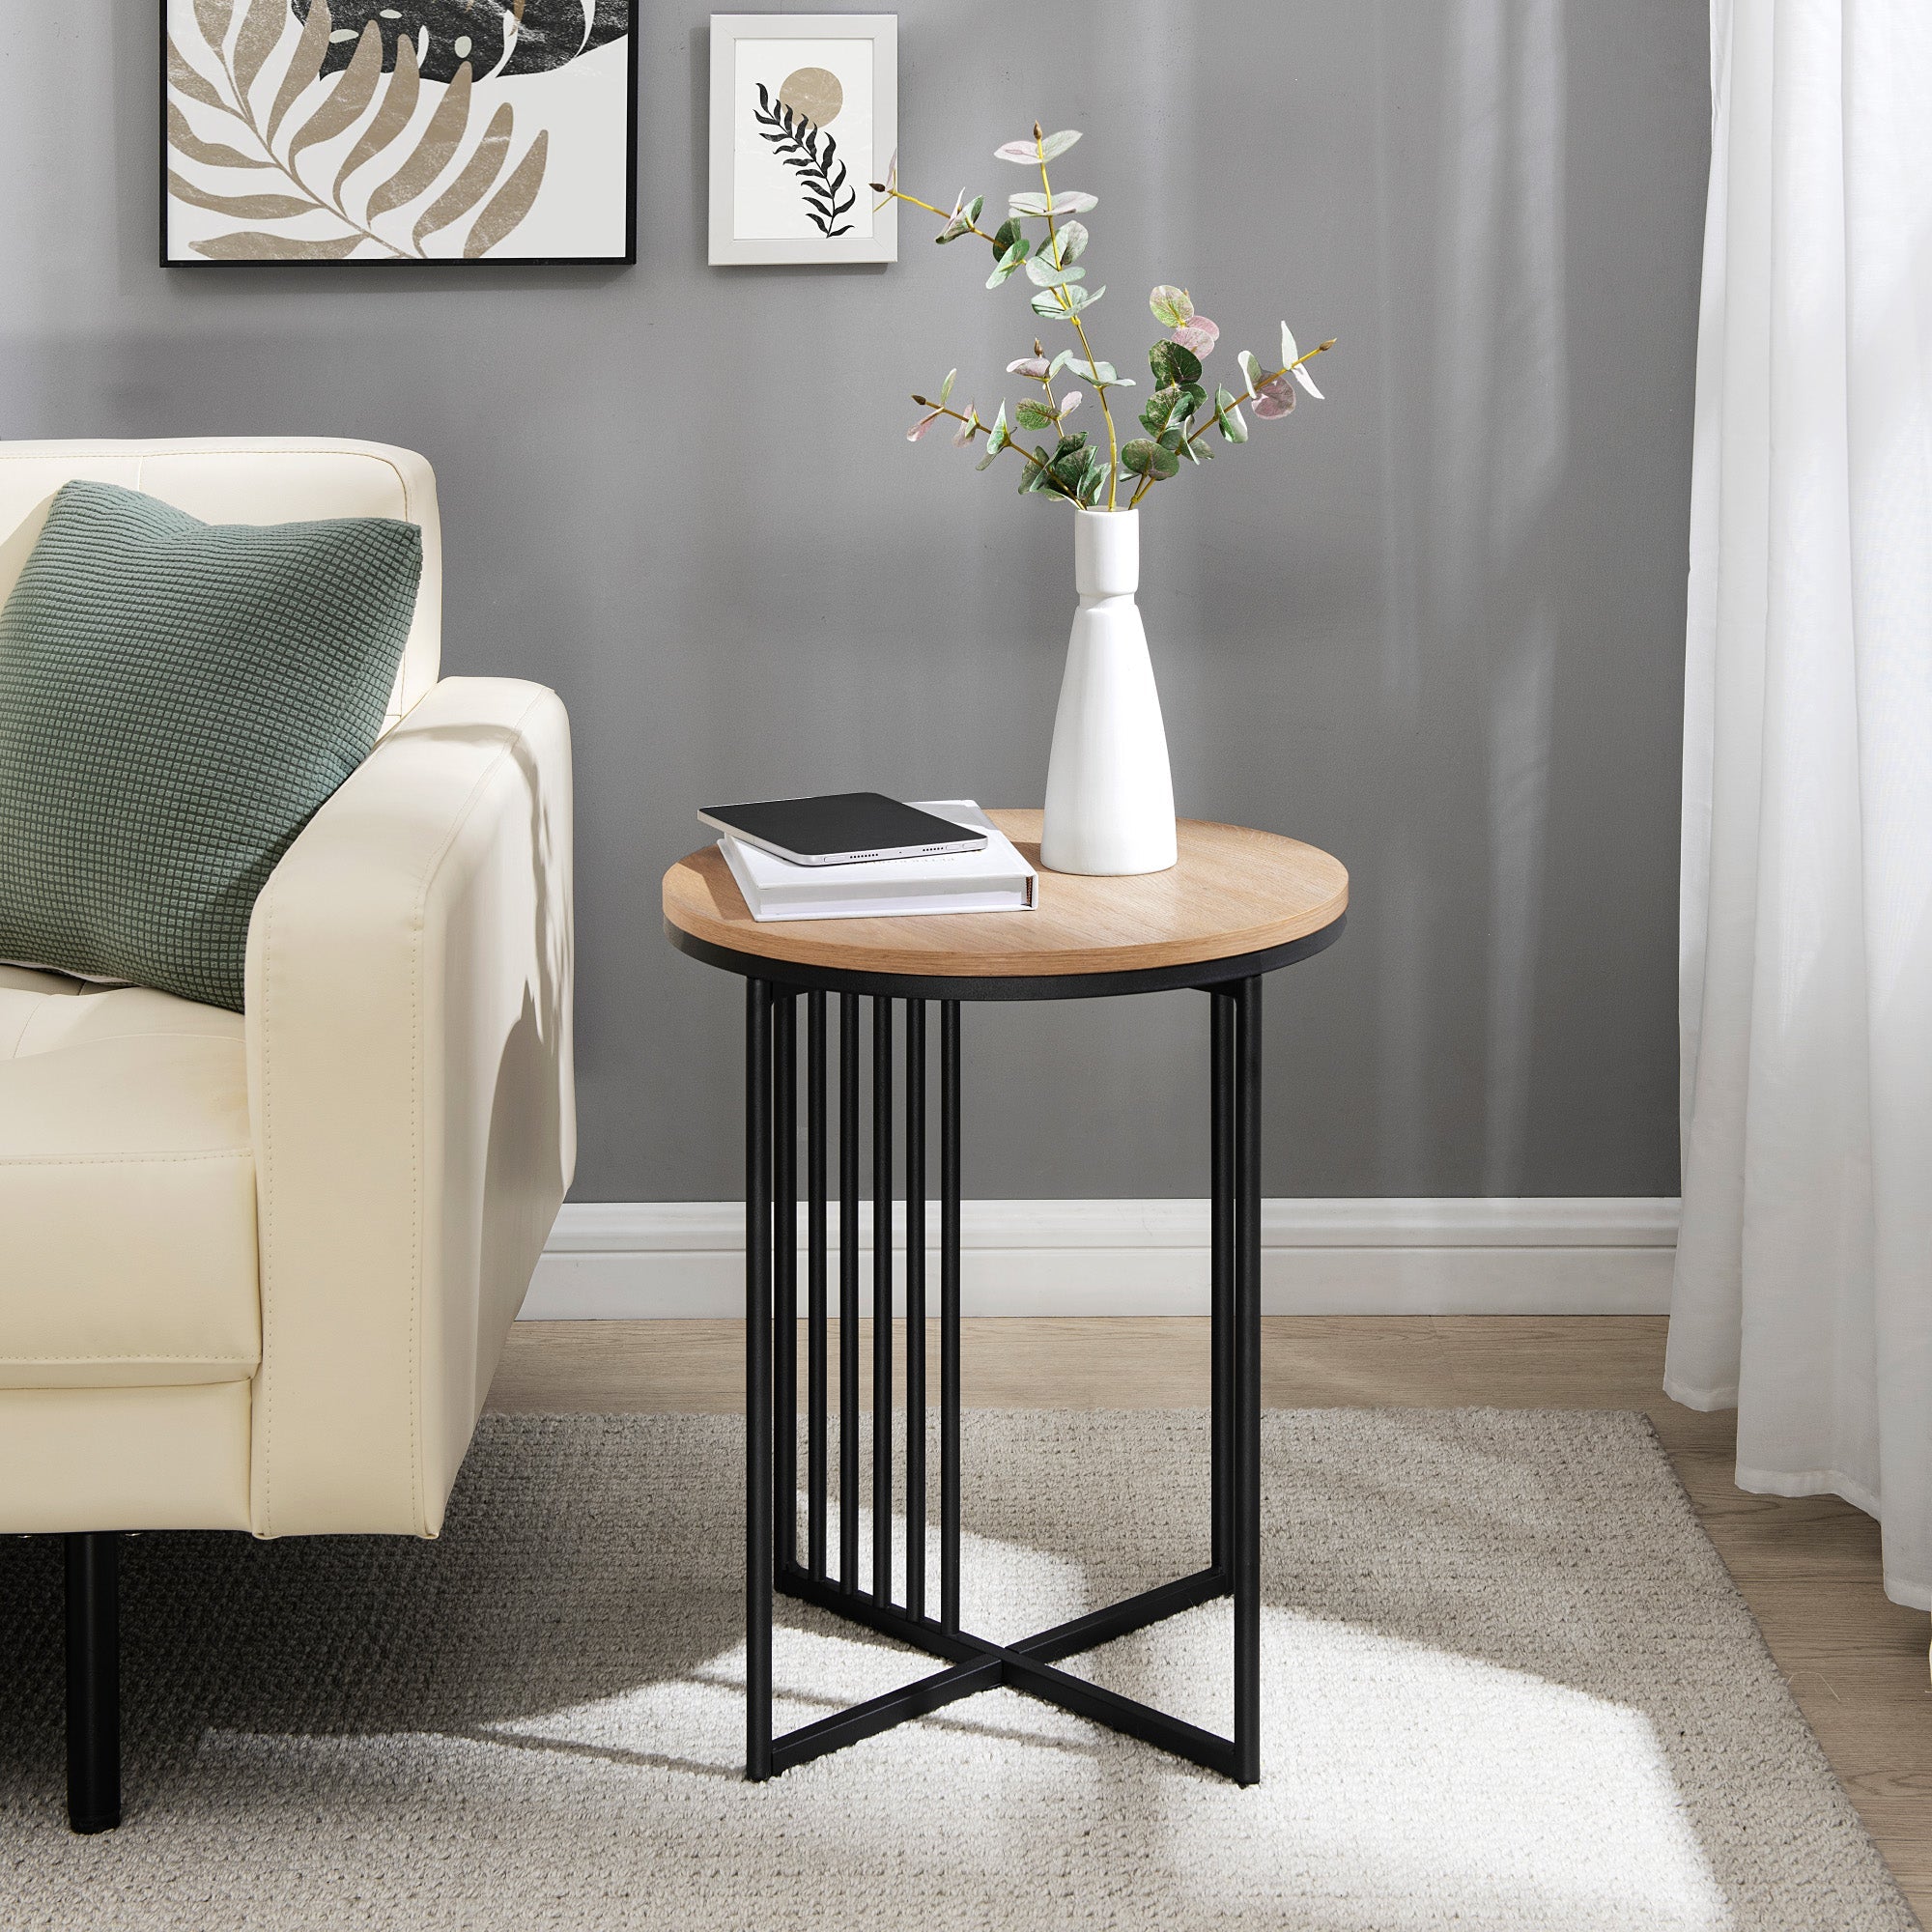 Metal-Slat Round Side Table - End Tables